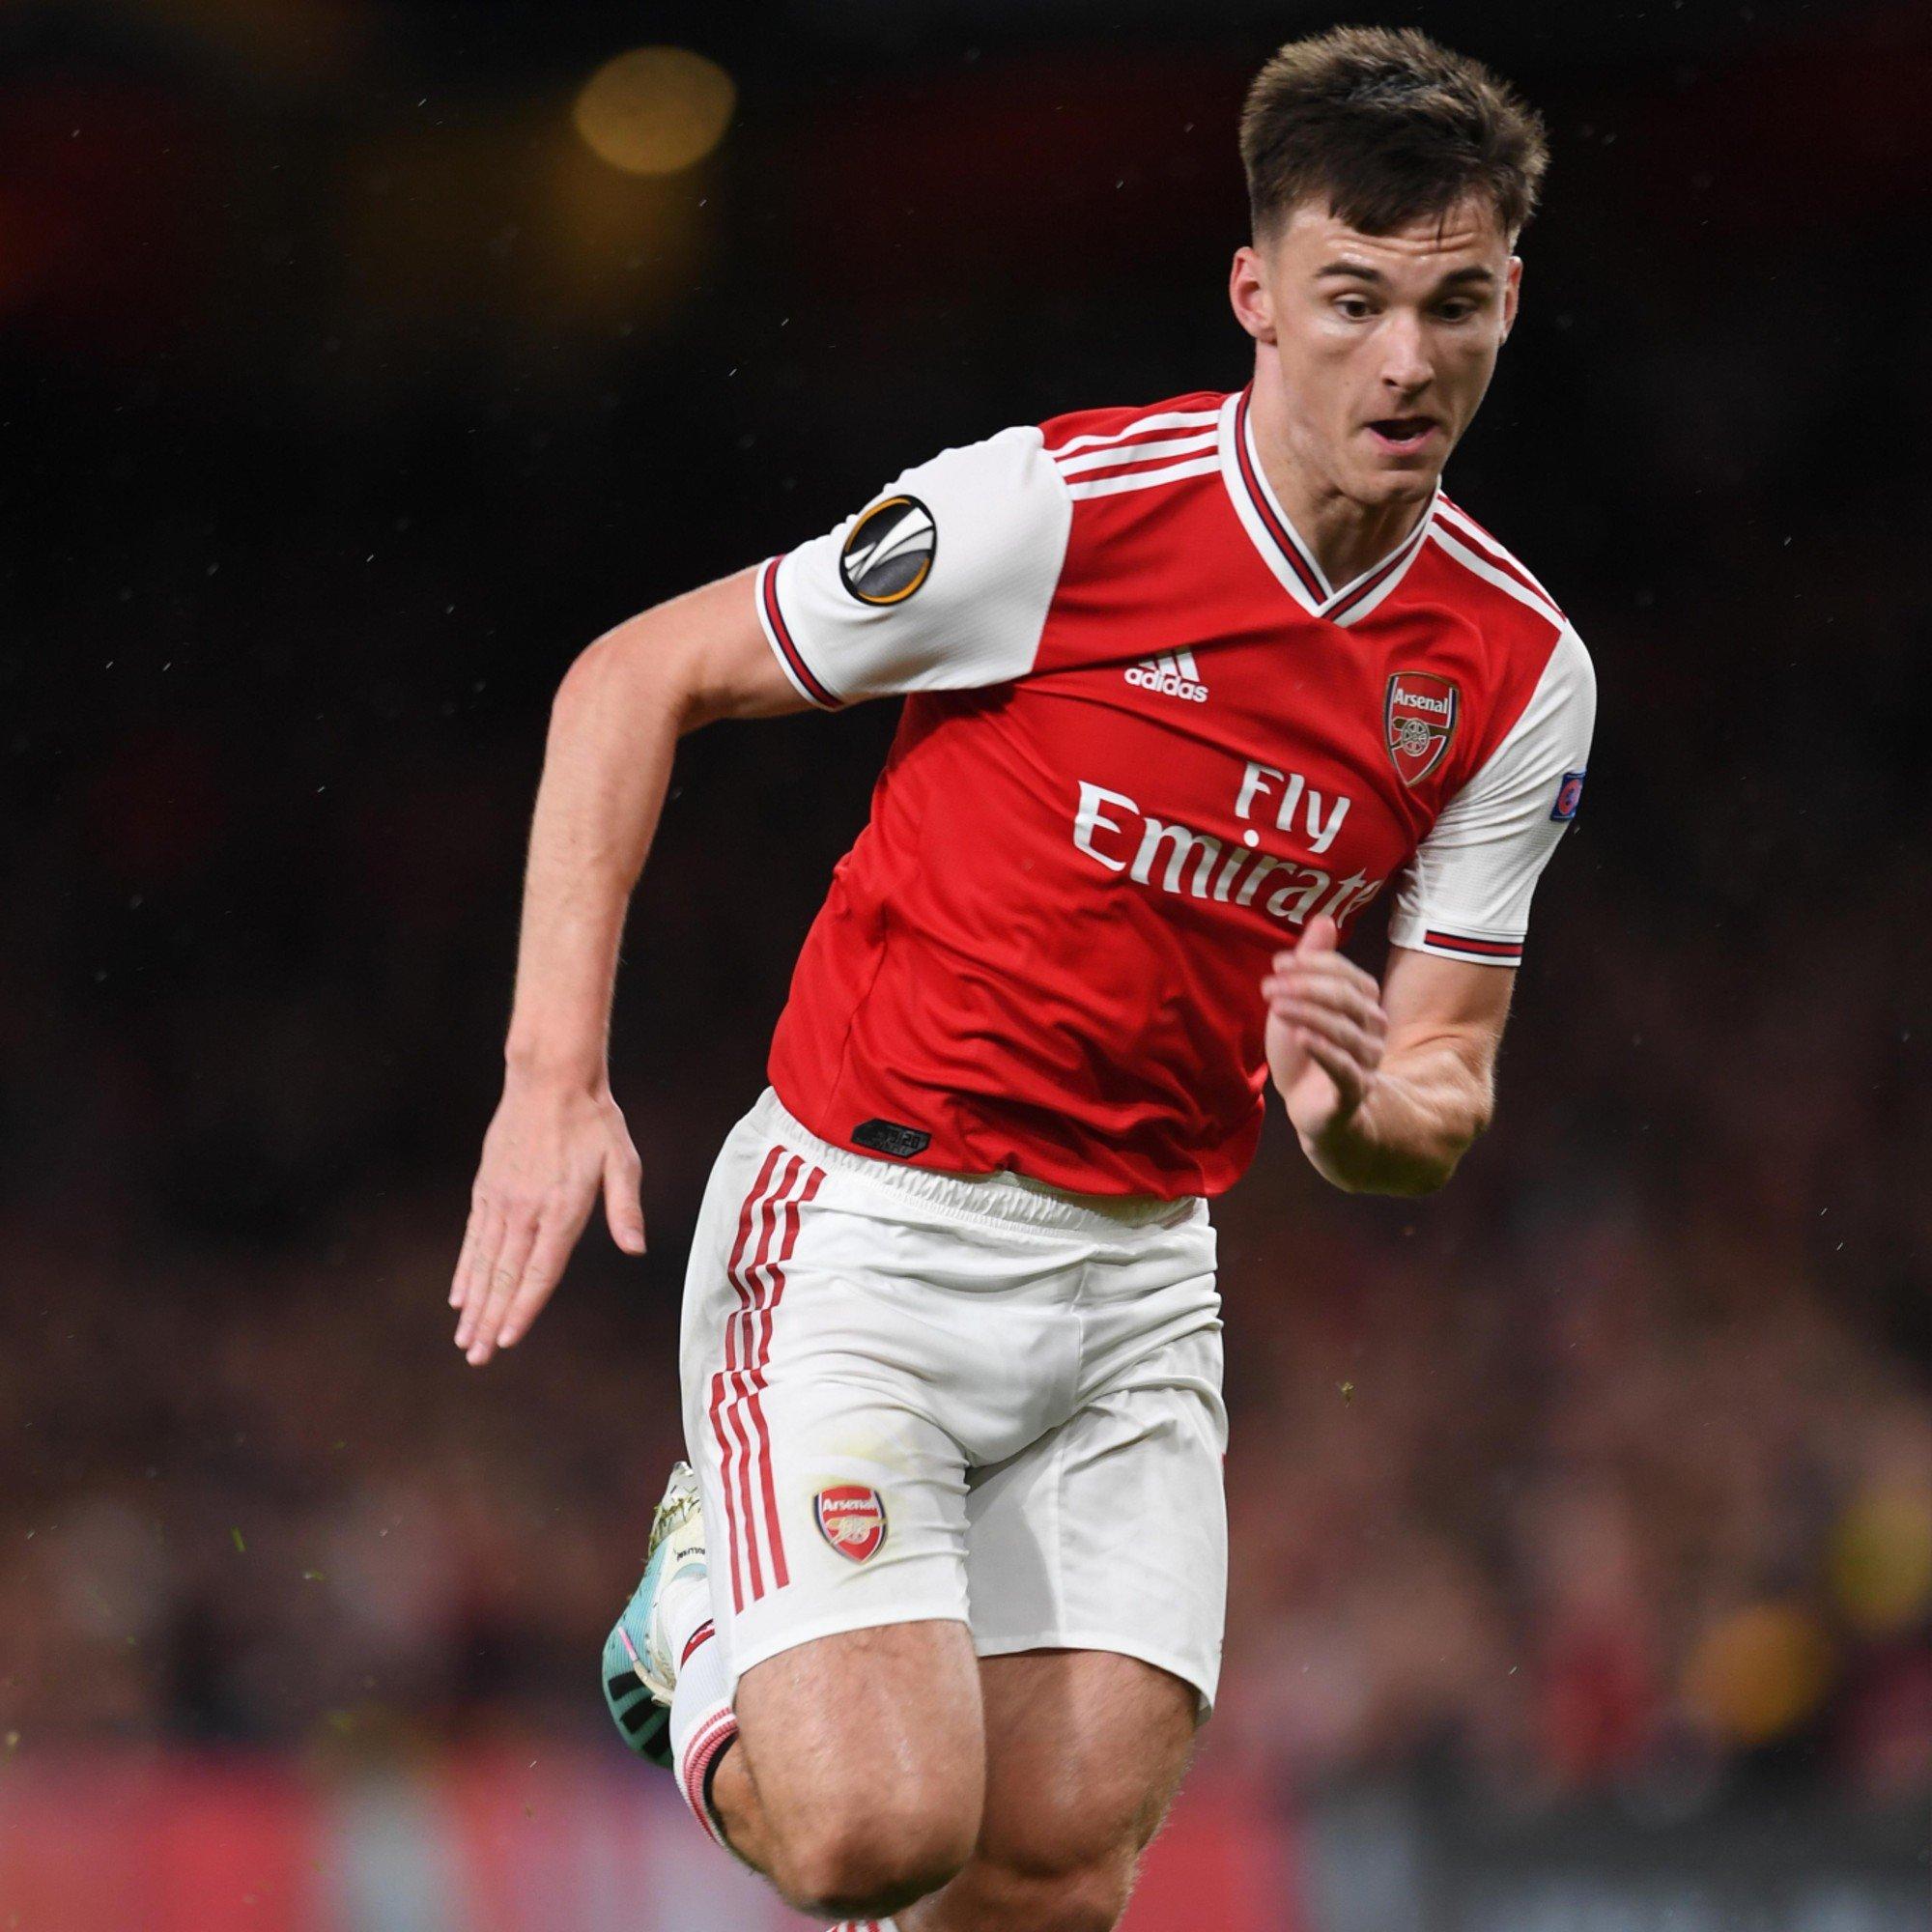 tierney in arsenal shirt